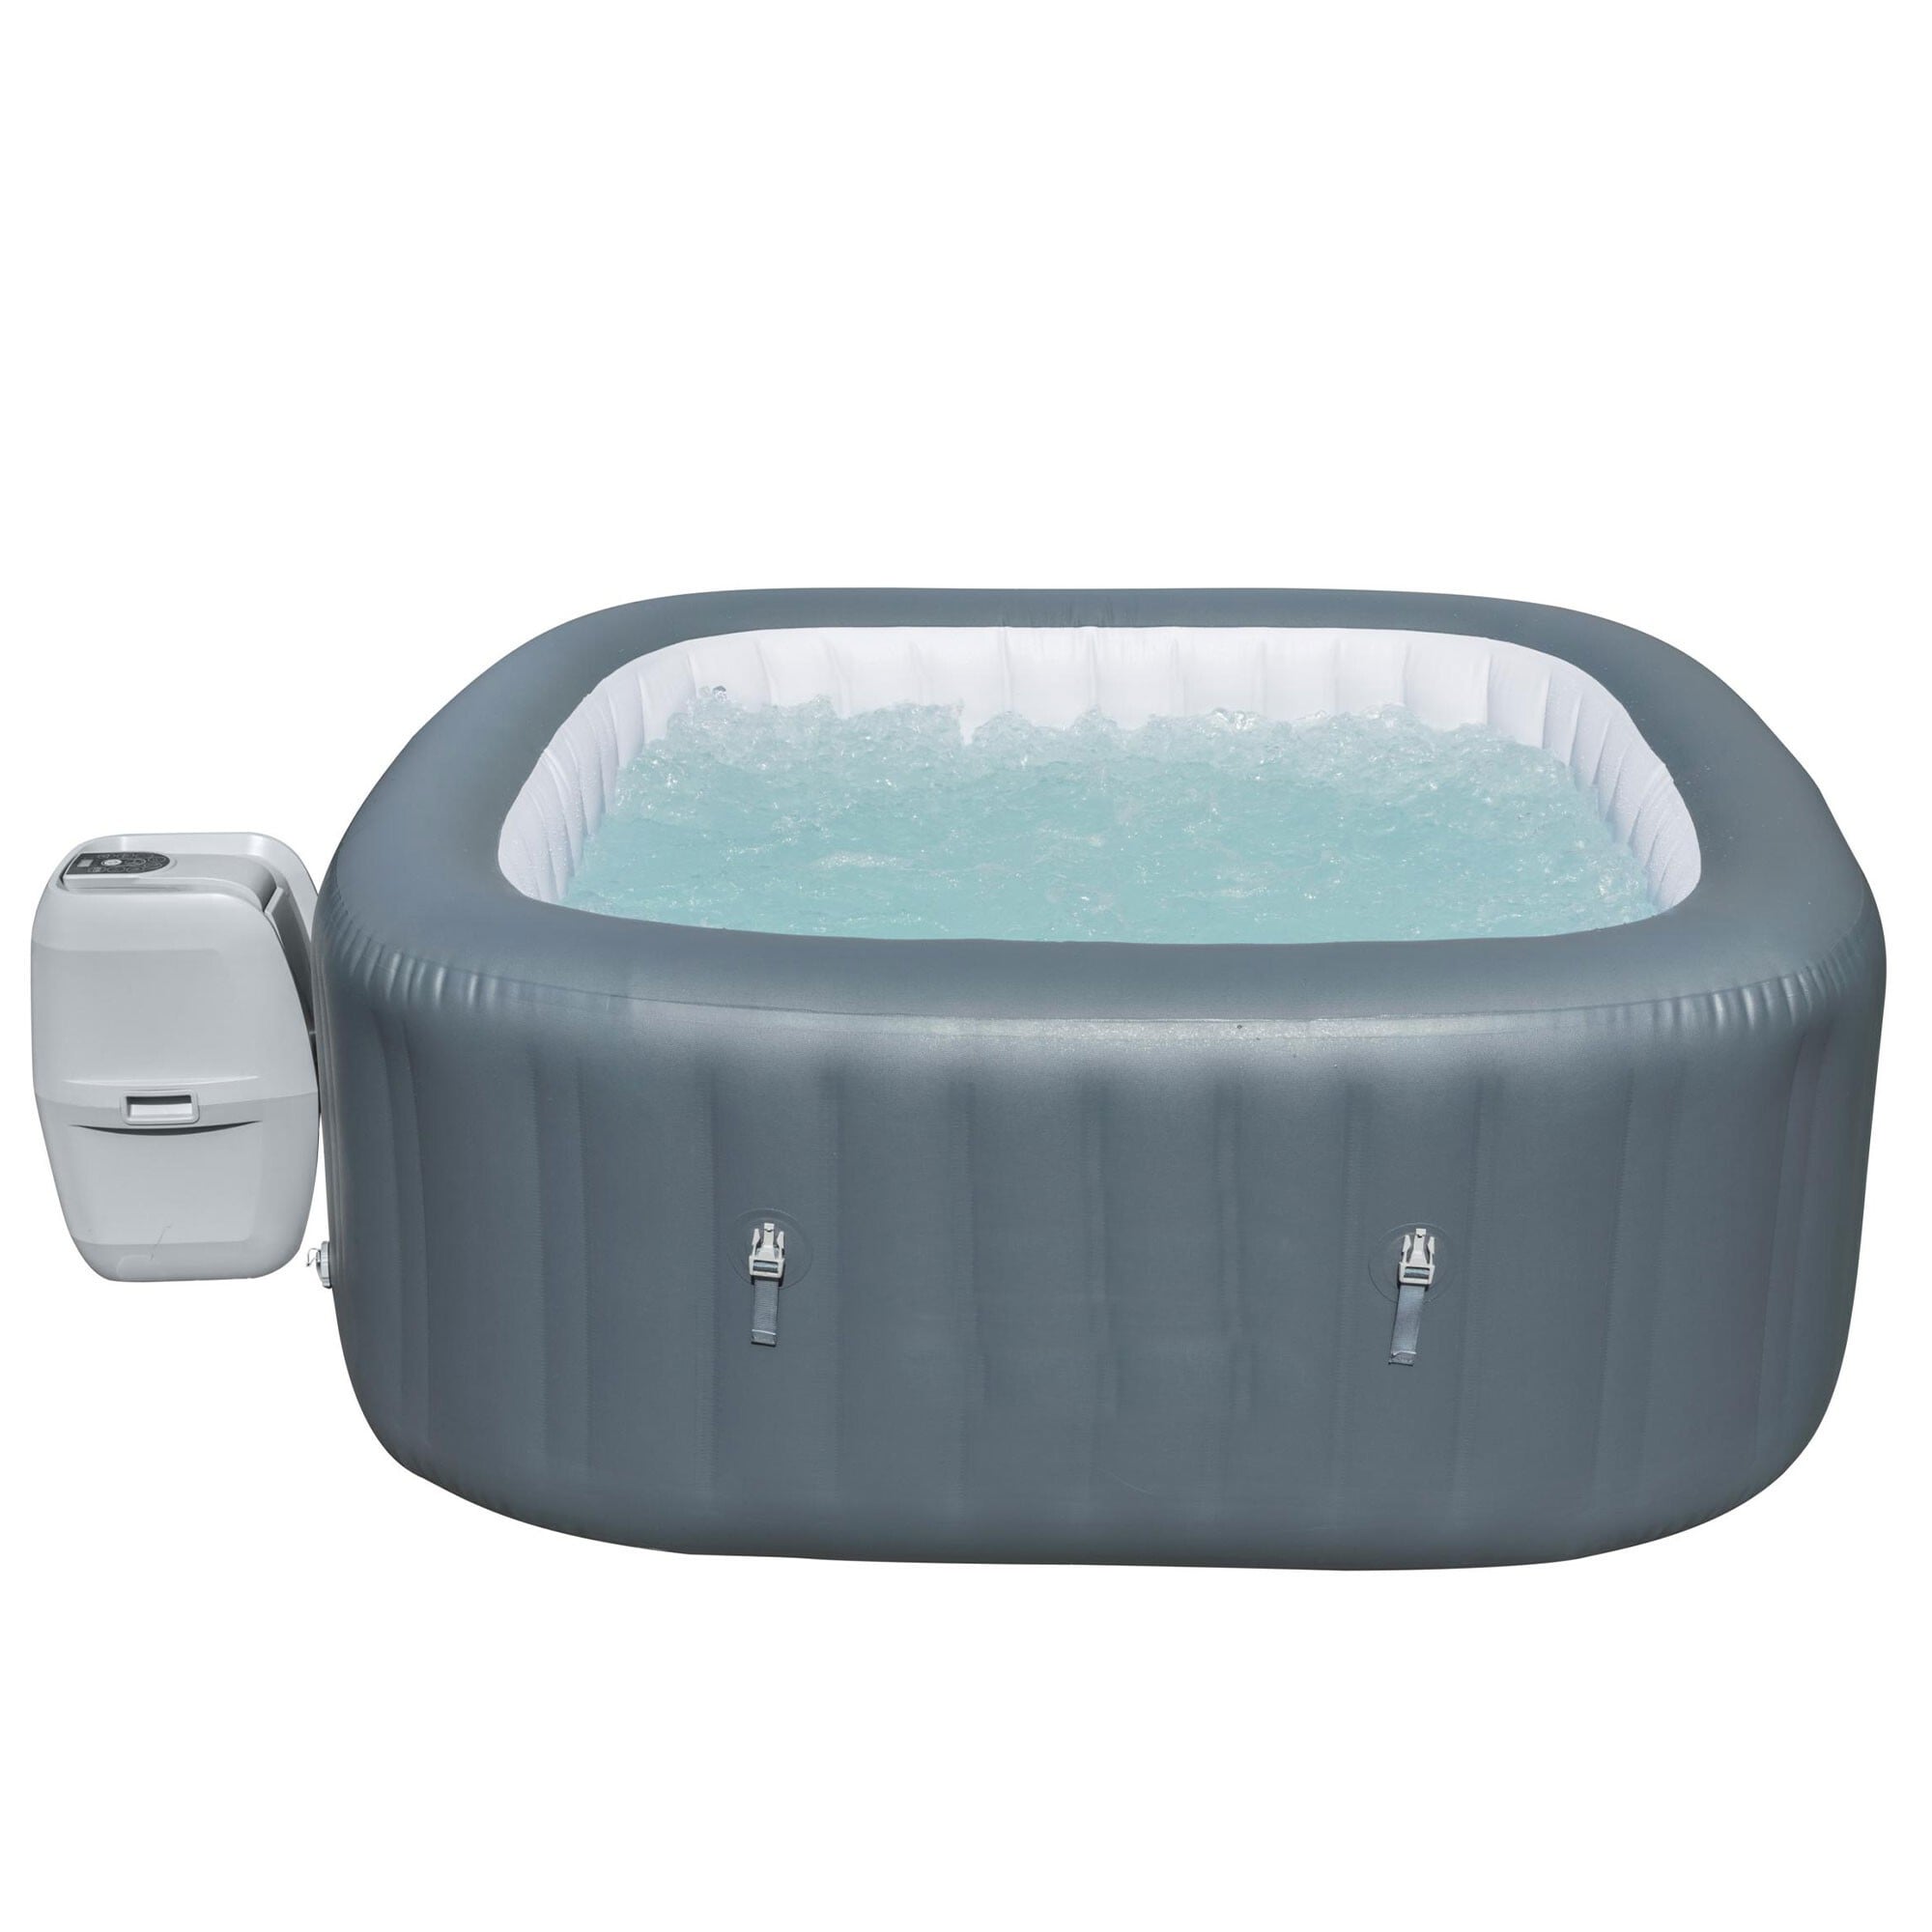 & 28-in Spas in at Hot 4-Person Square Tub department x Tubs the 71-in Inflatable Hot Bestway